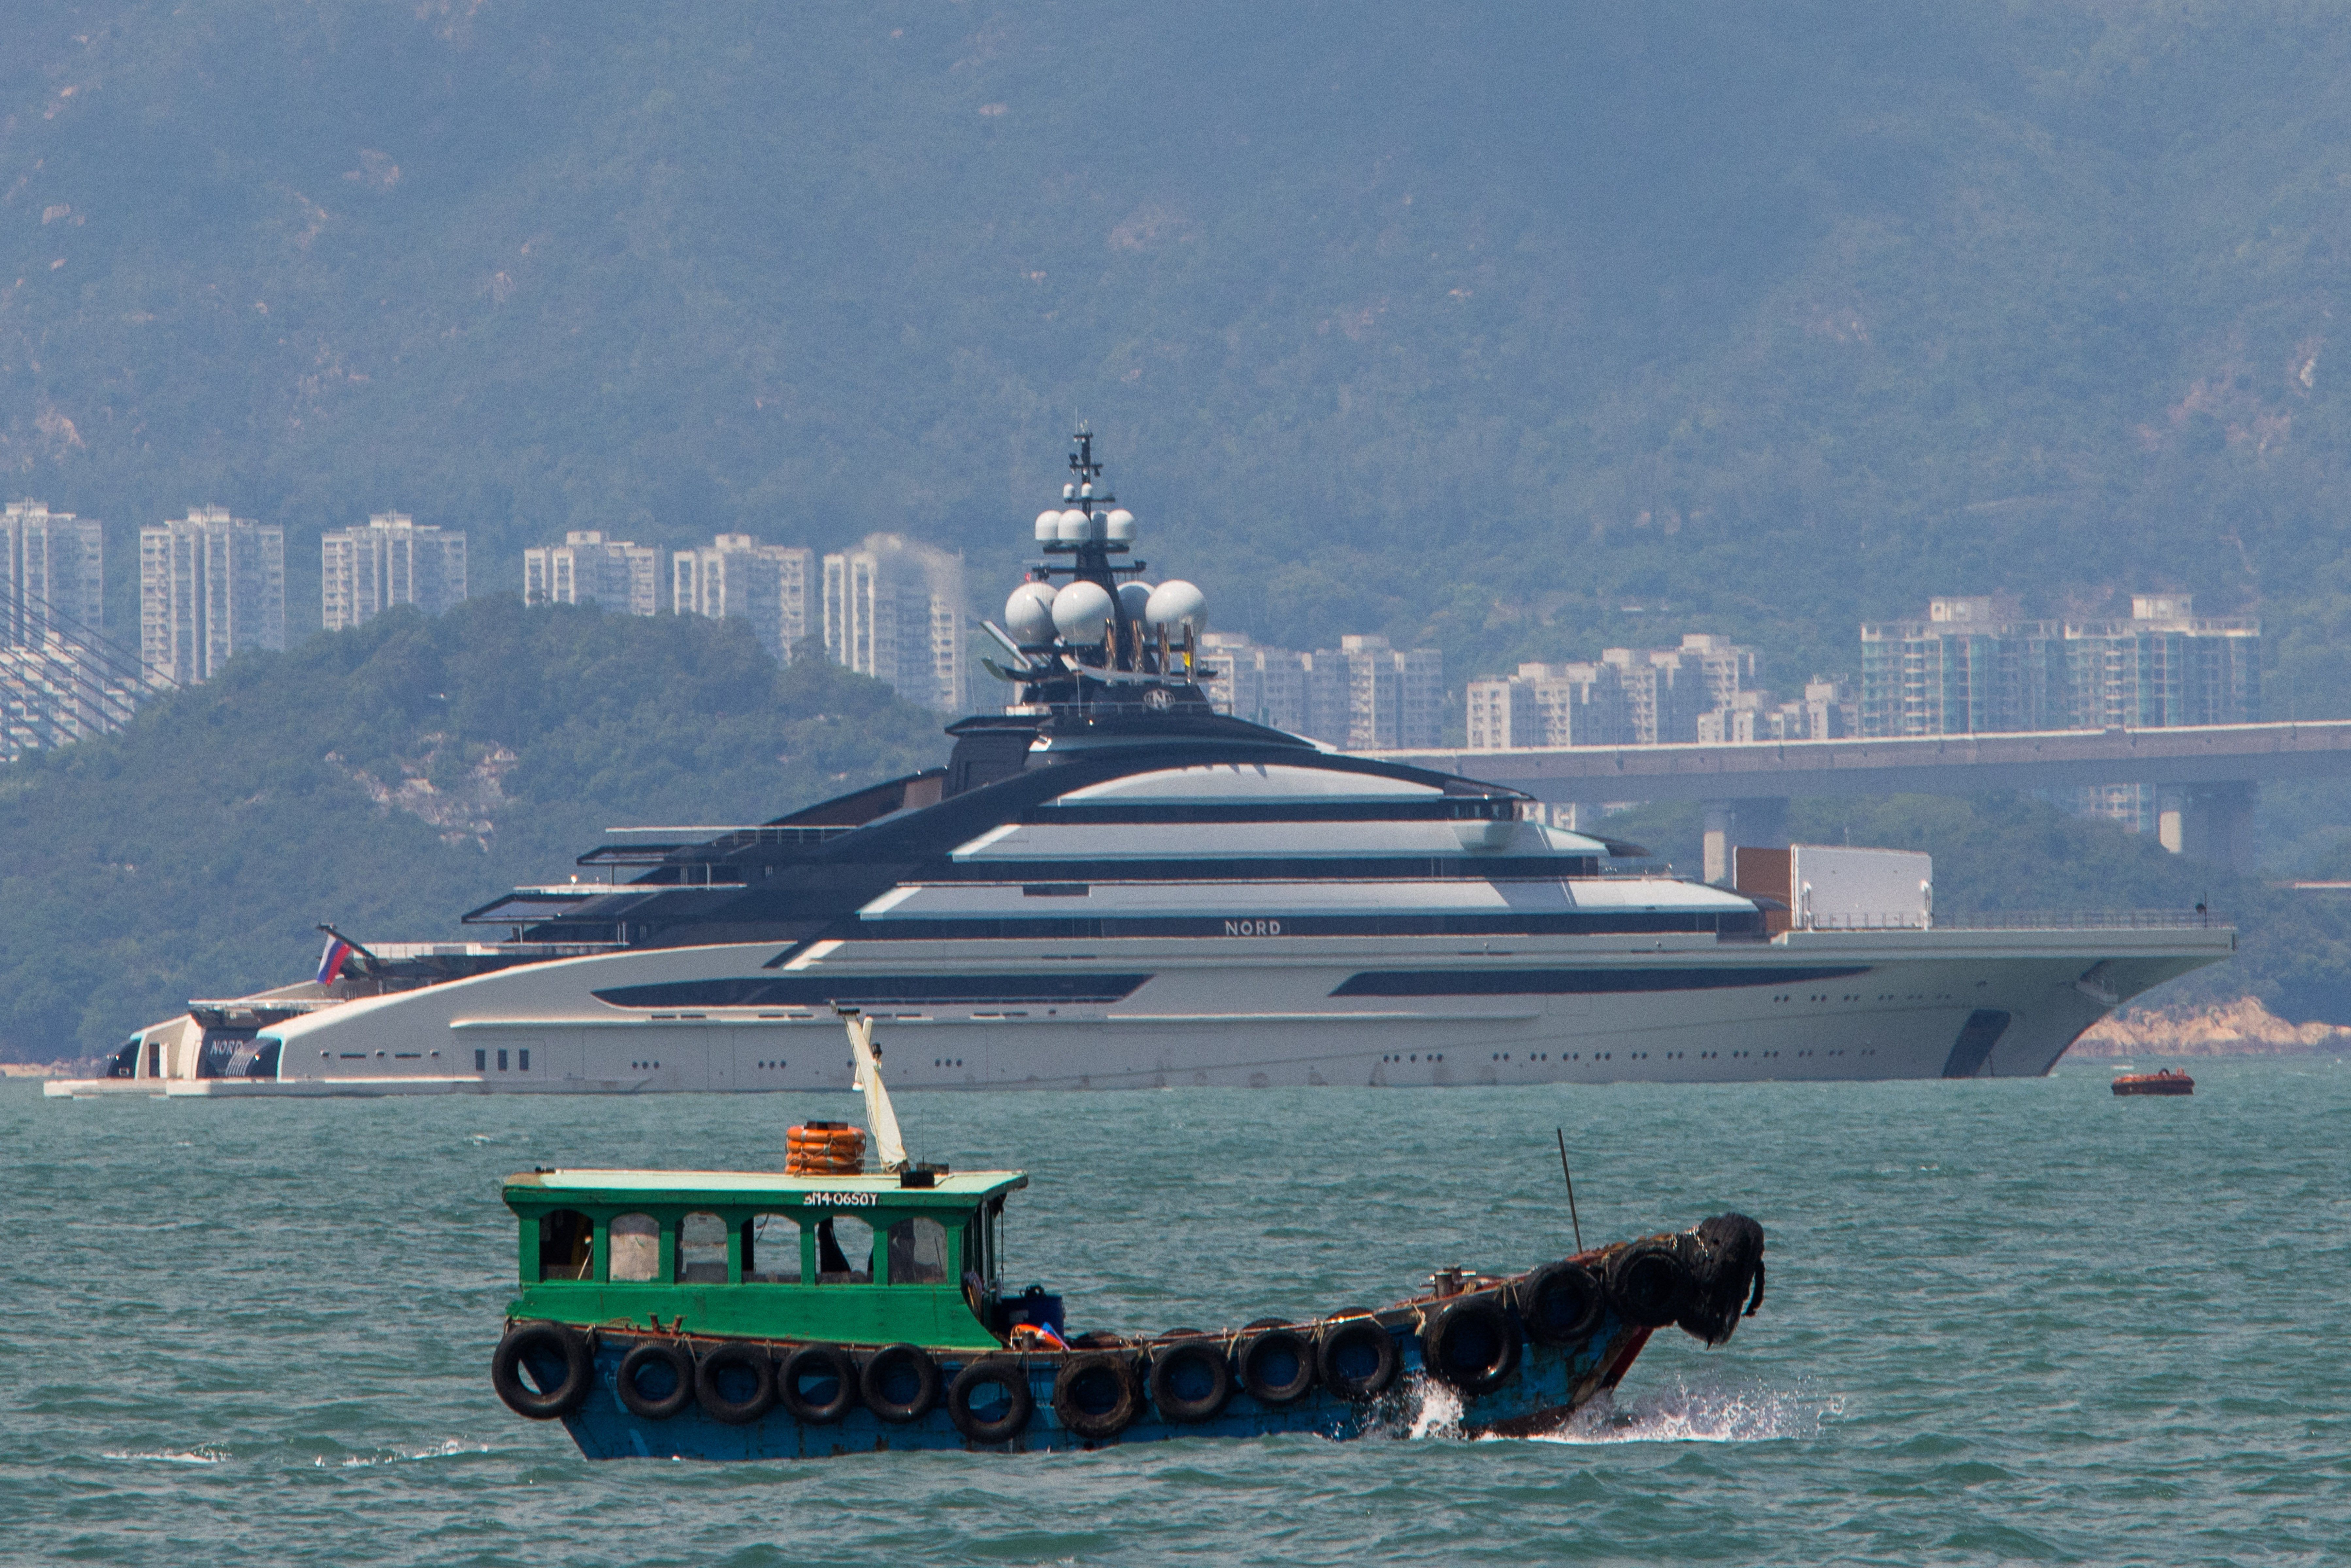 The 465-foot superyacht Nord, a luxury yacht worth over half a billion U.S. dollars, reportedly owned by the sanctioned Russian oligarch Alexei Mordashov 